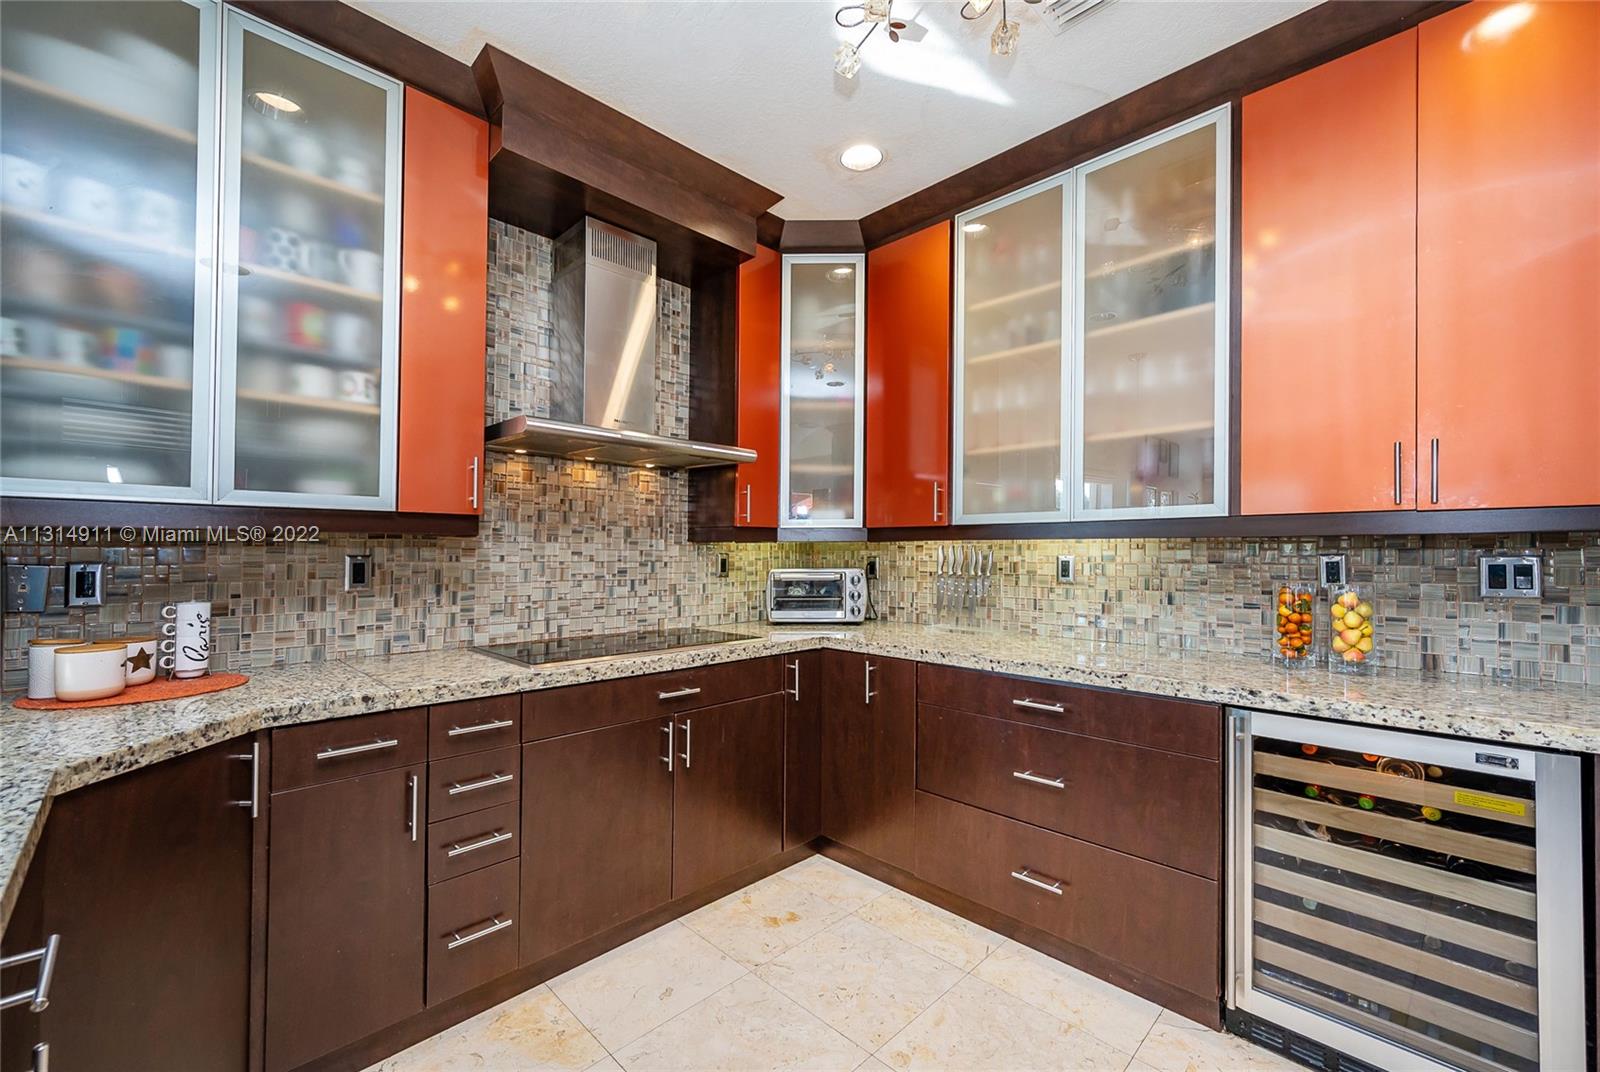 Granite counter, wine cooler, and plenty of cabinet space.